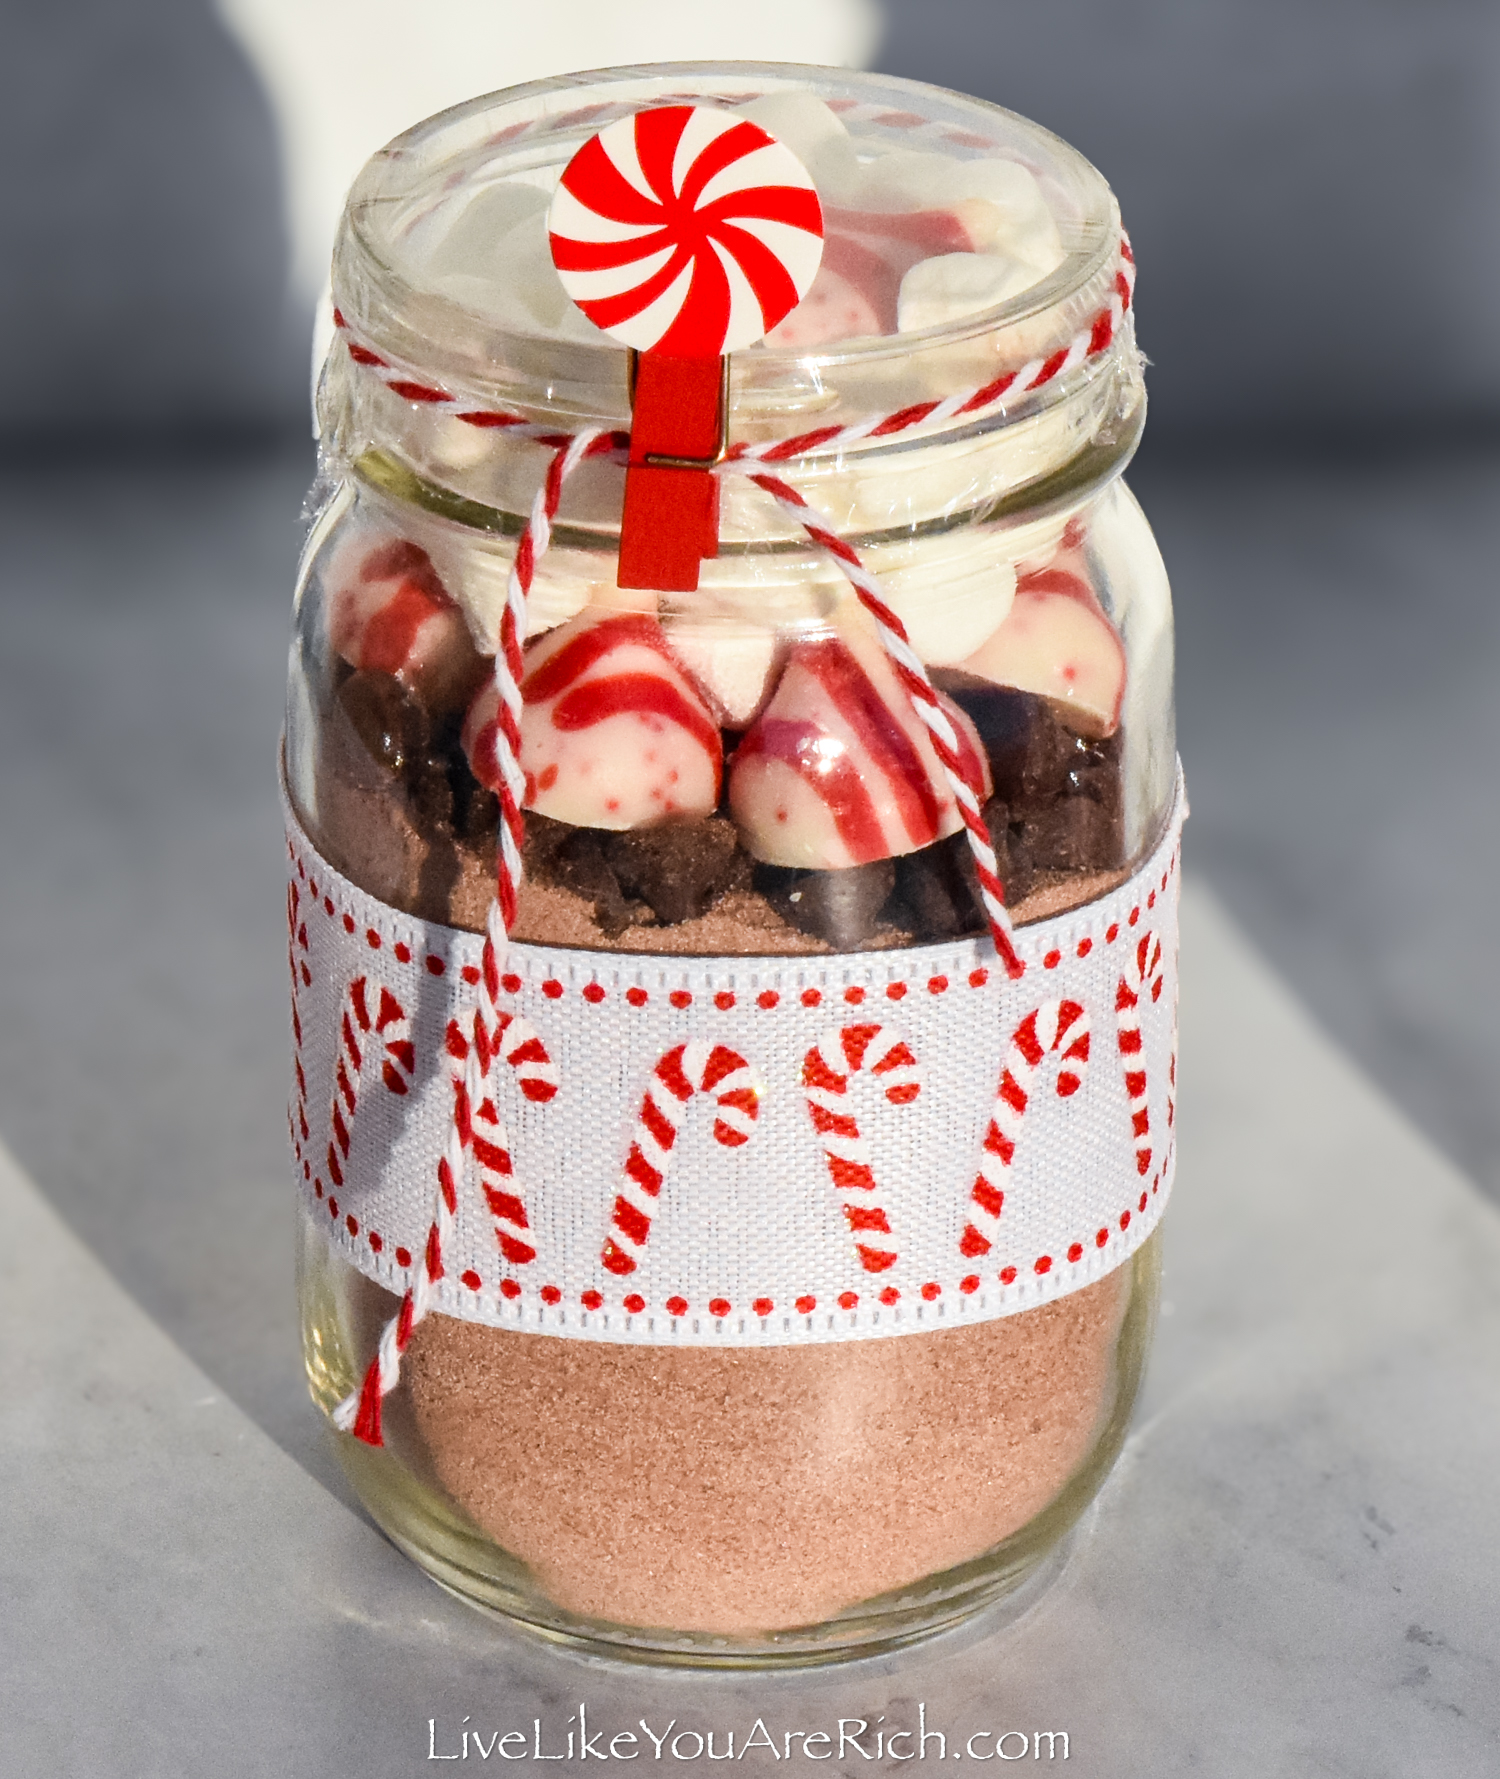 https://livelikeyouarerich.com/wp-content/uploads/2023/11/Neighbor-Christmas-Gift-Hot-Cocoa-in-a-Jar-with-Printable-17.jpg